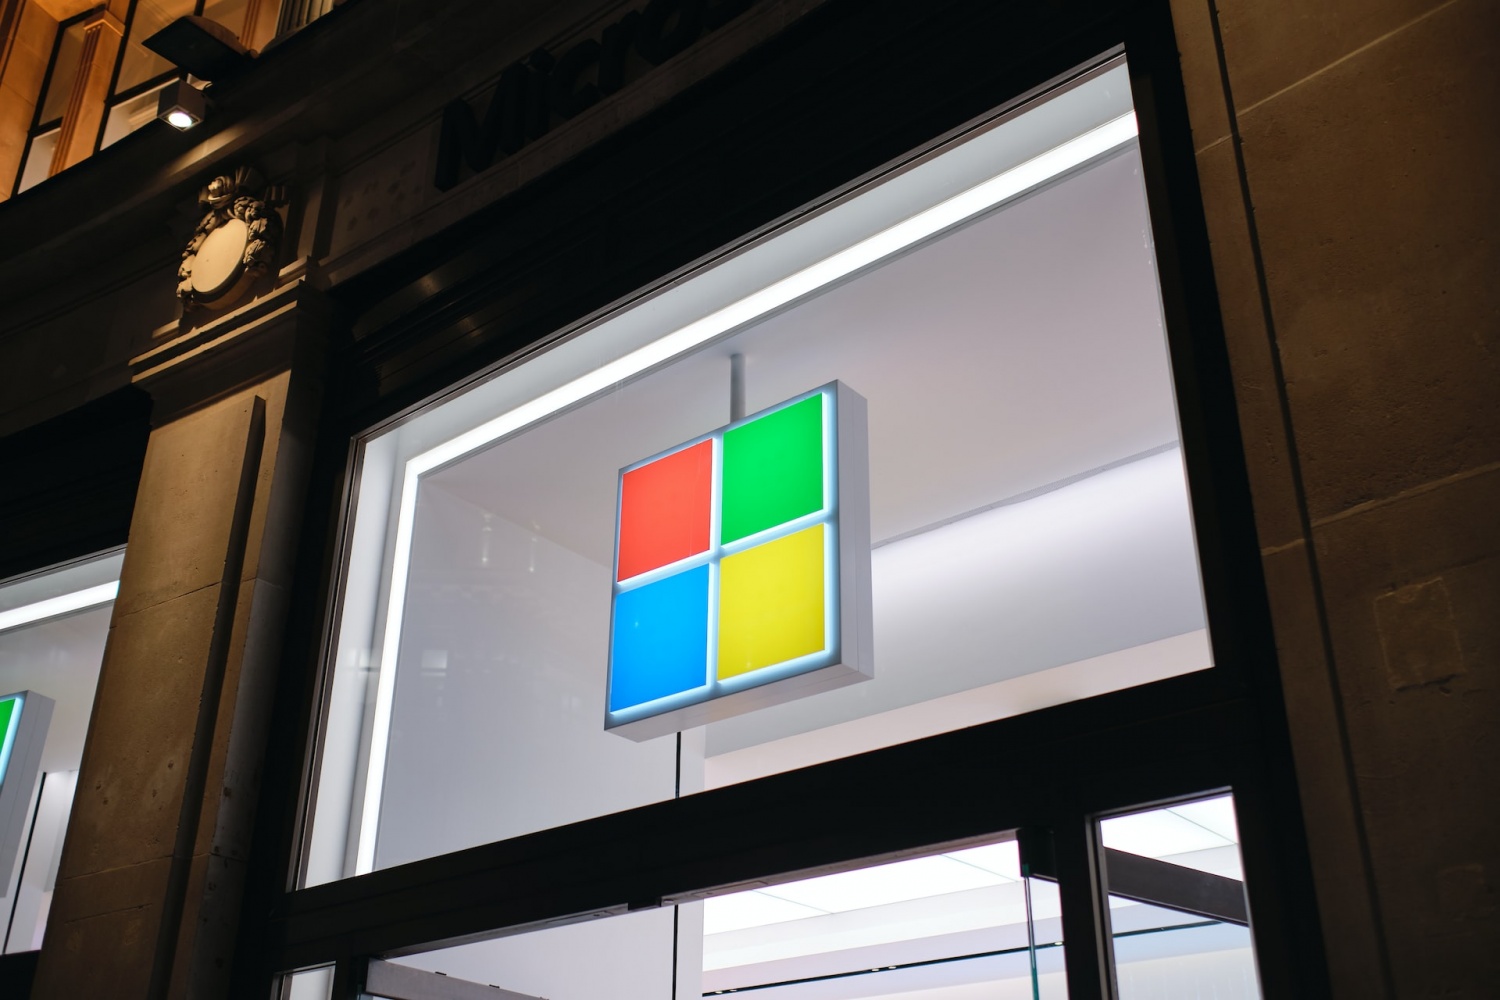 Explained: What's Happening With Microsoft's Acquisition Of